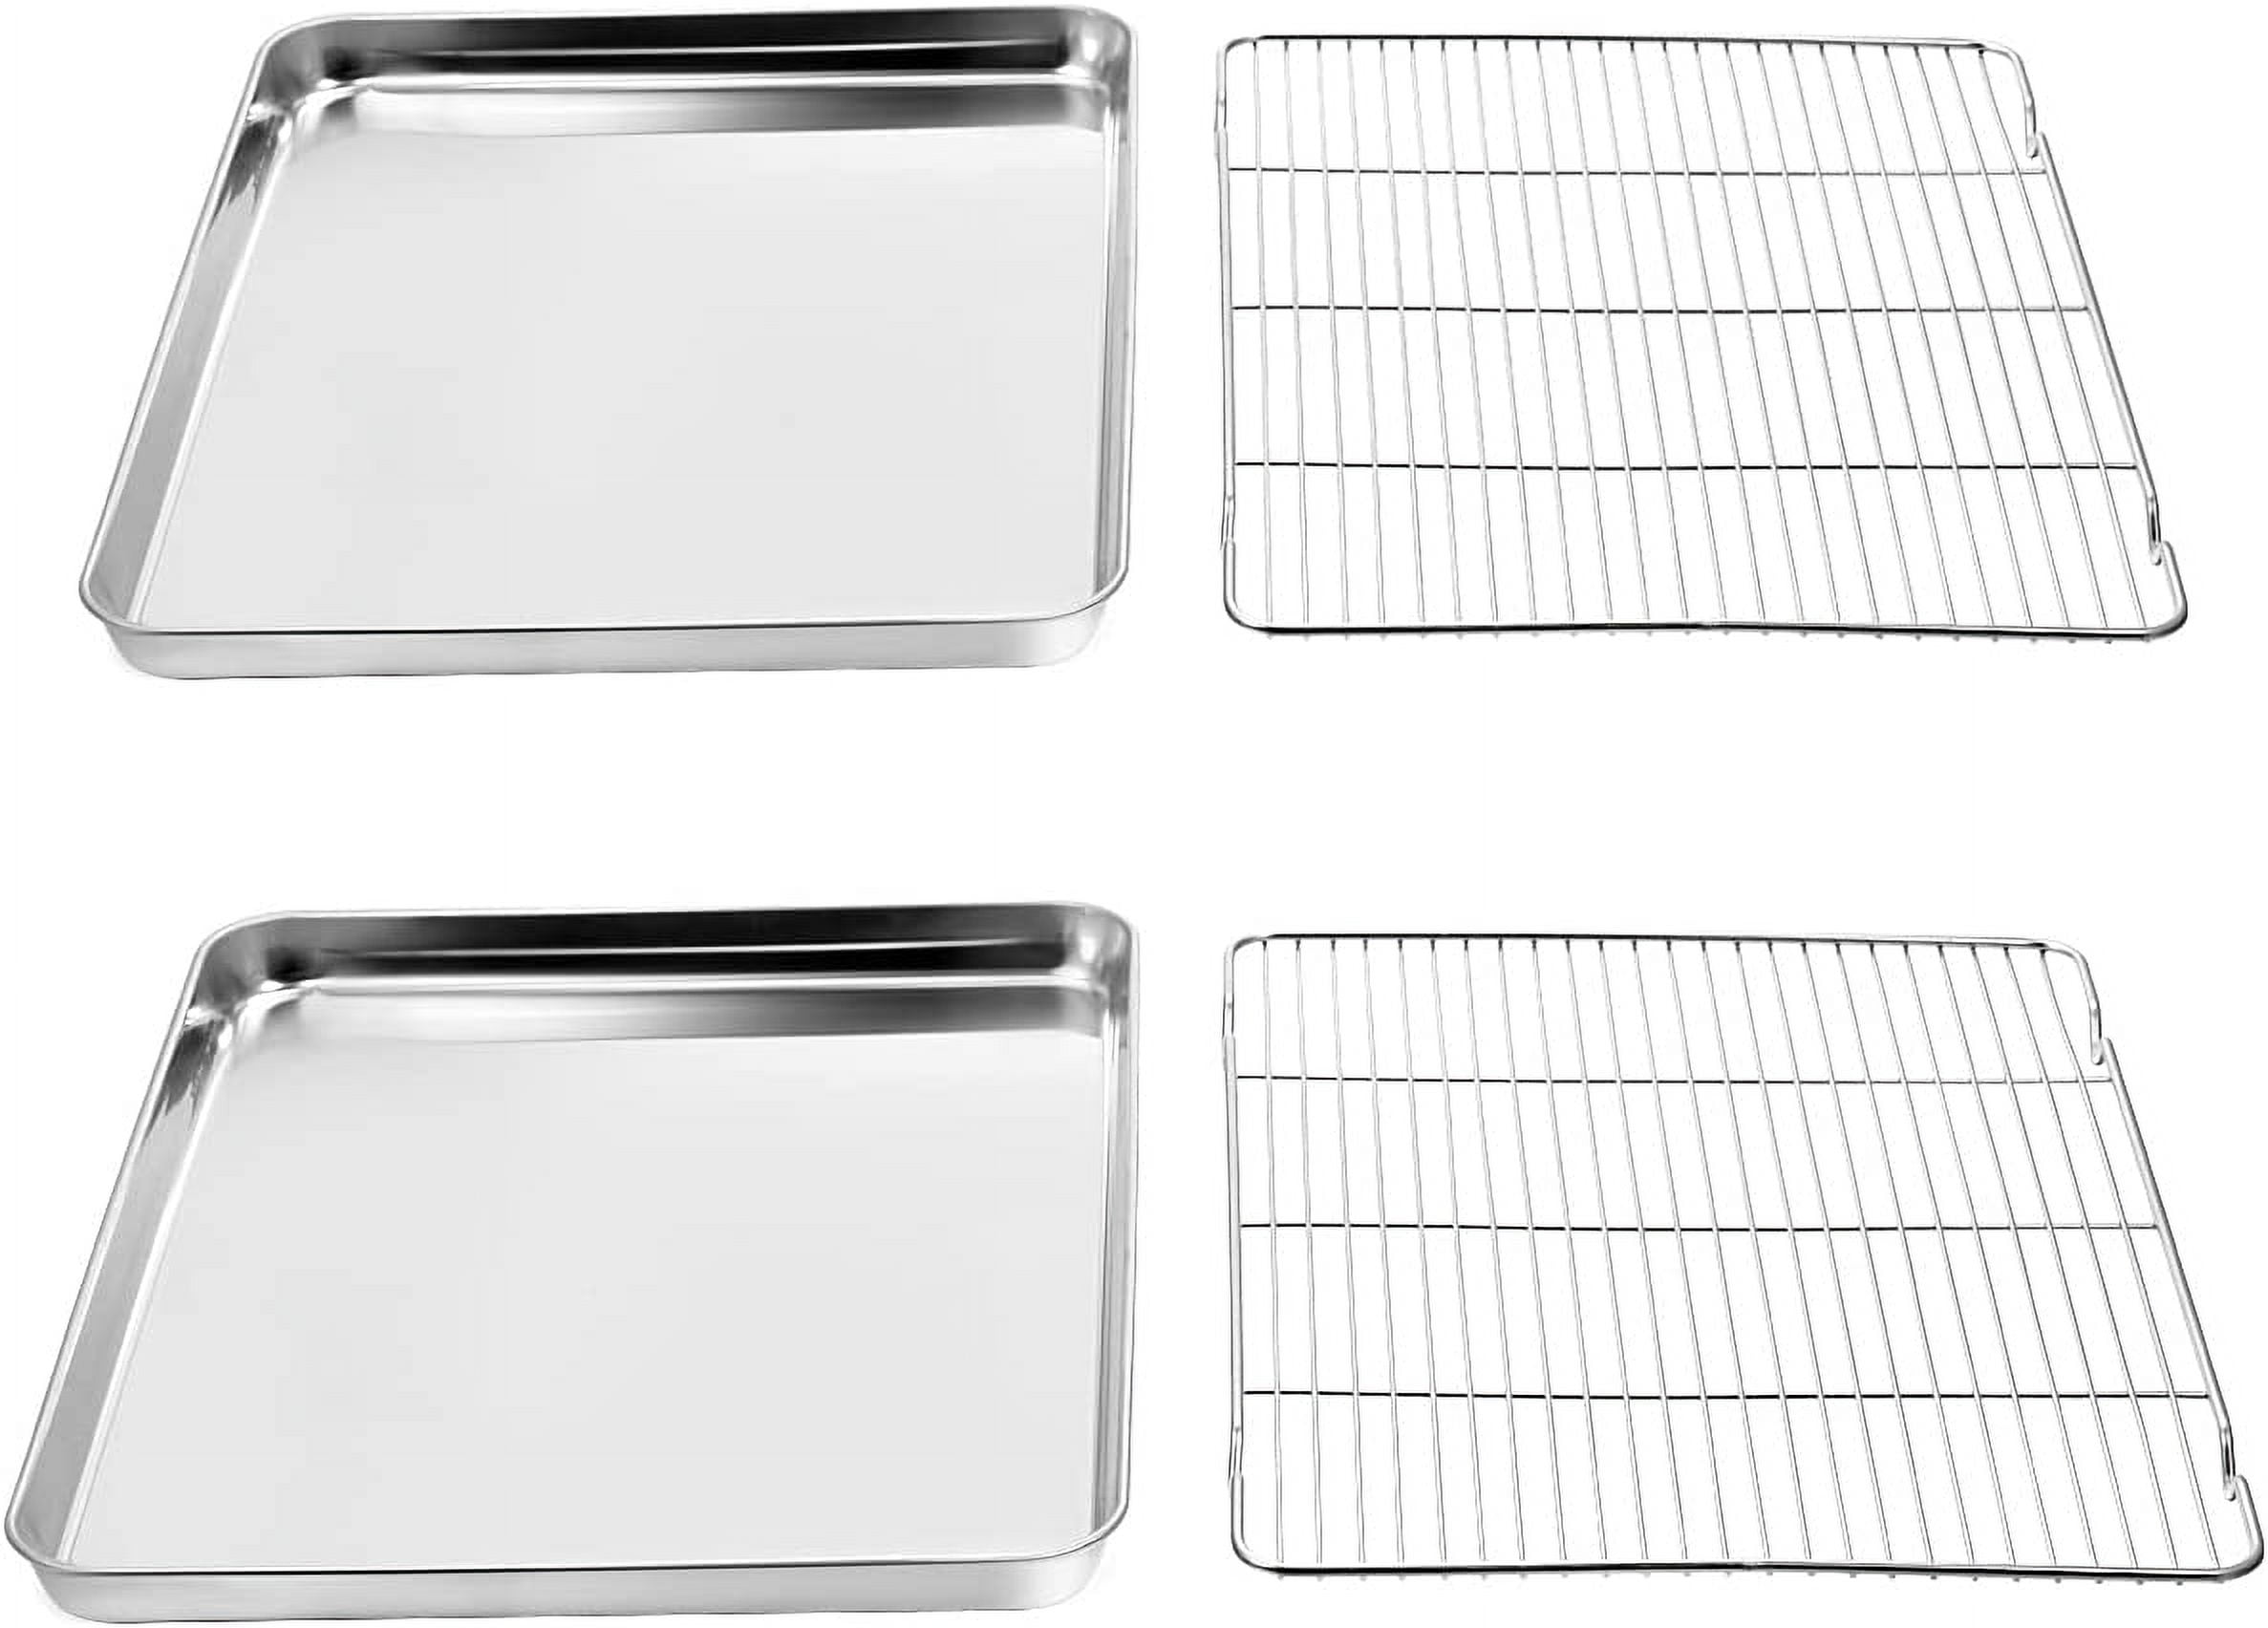 Bastwe Baking Sheet with Cooling Rack and Silicone Baking Mat, 20 Inch  Stainless Steel Bakeware, Healthy & Nontoxic & Rustproof & Easy Clean 